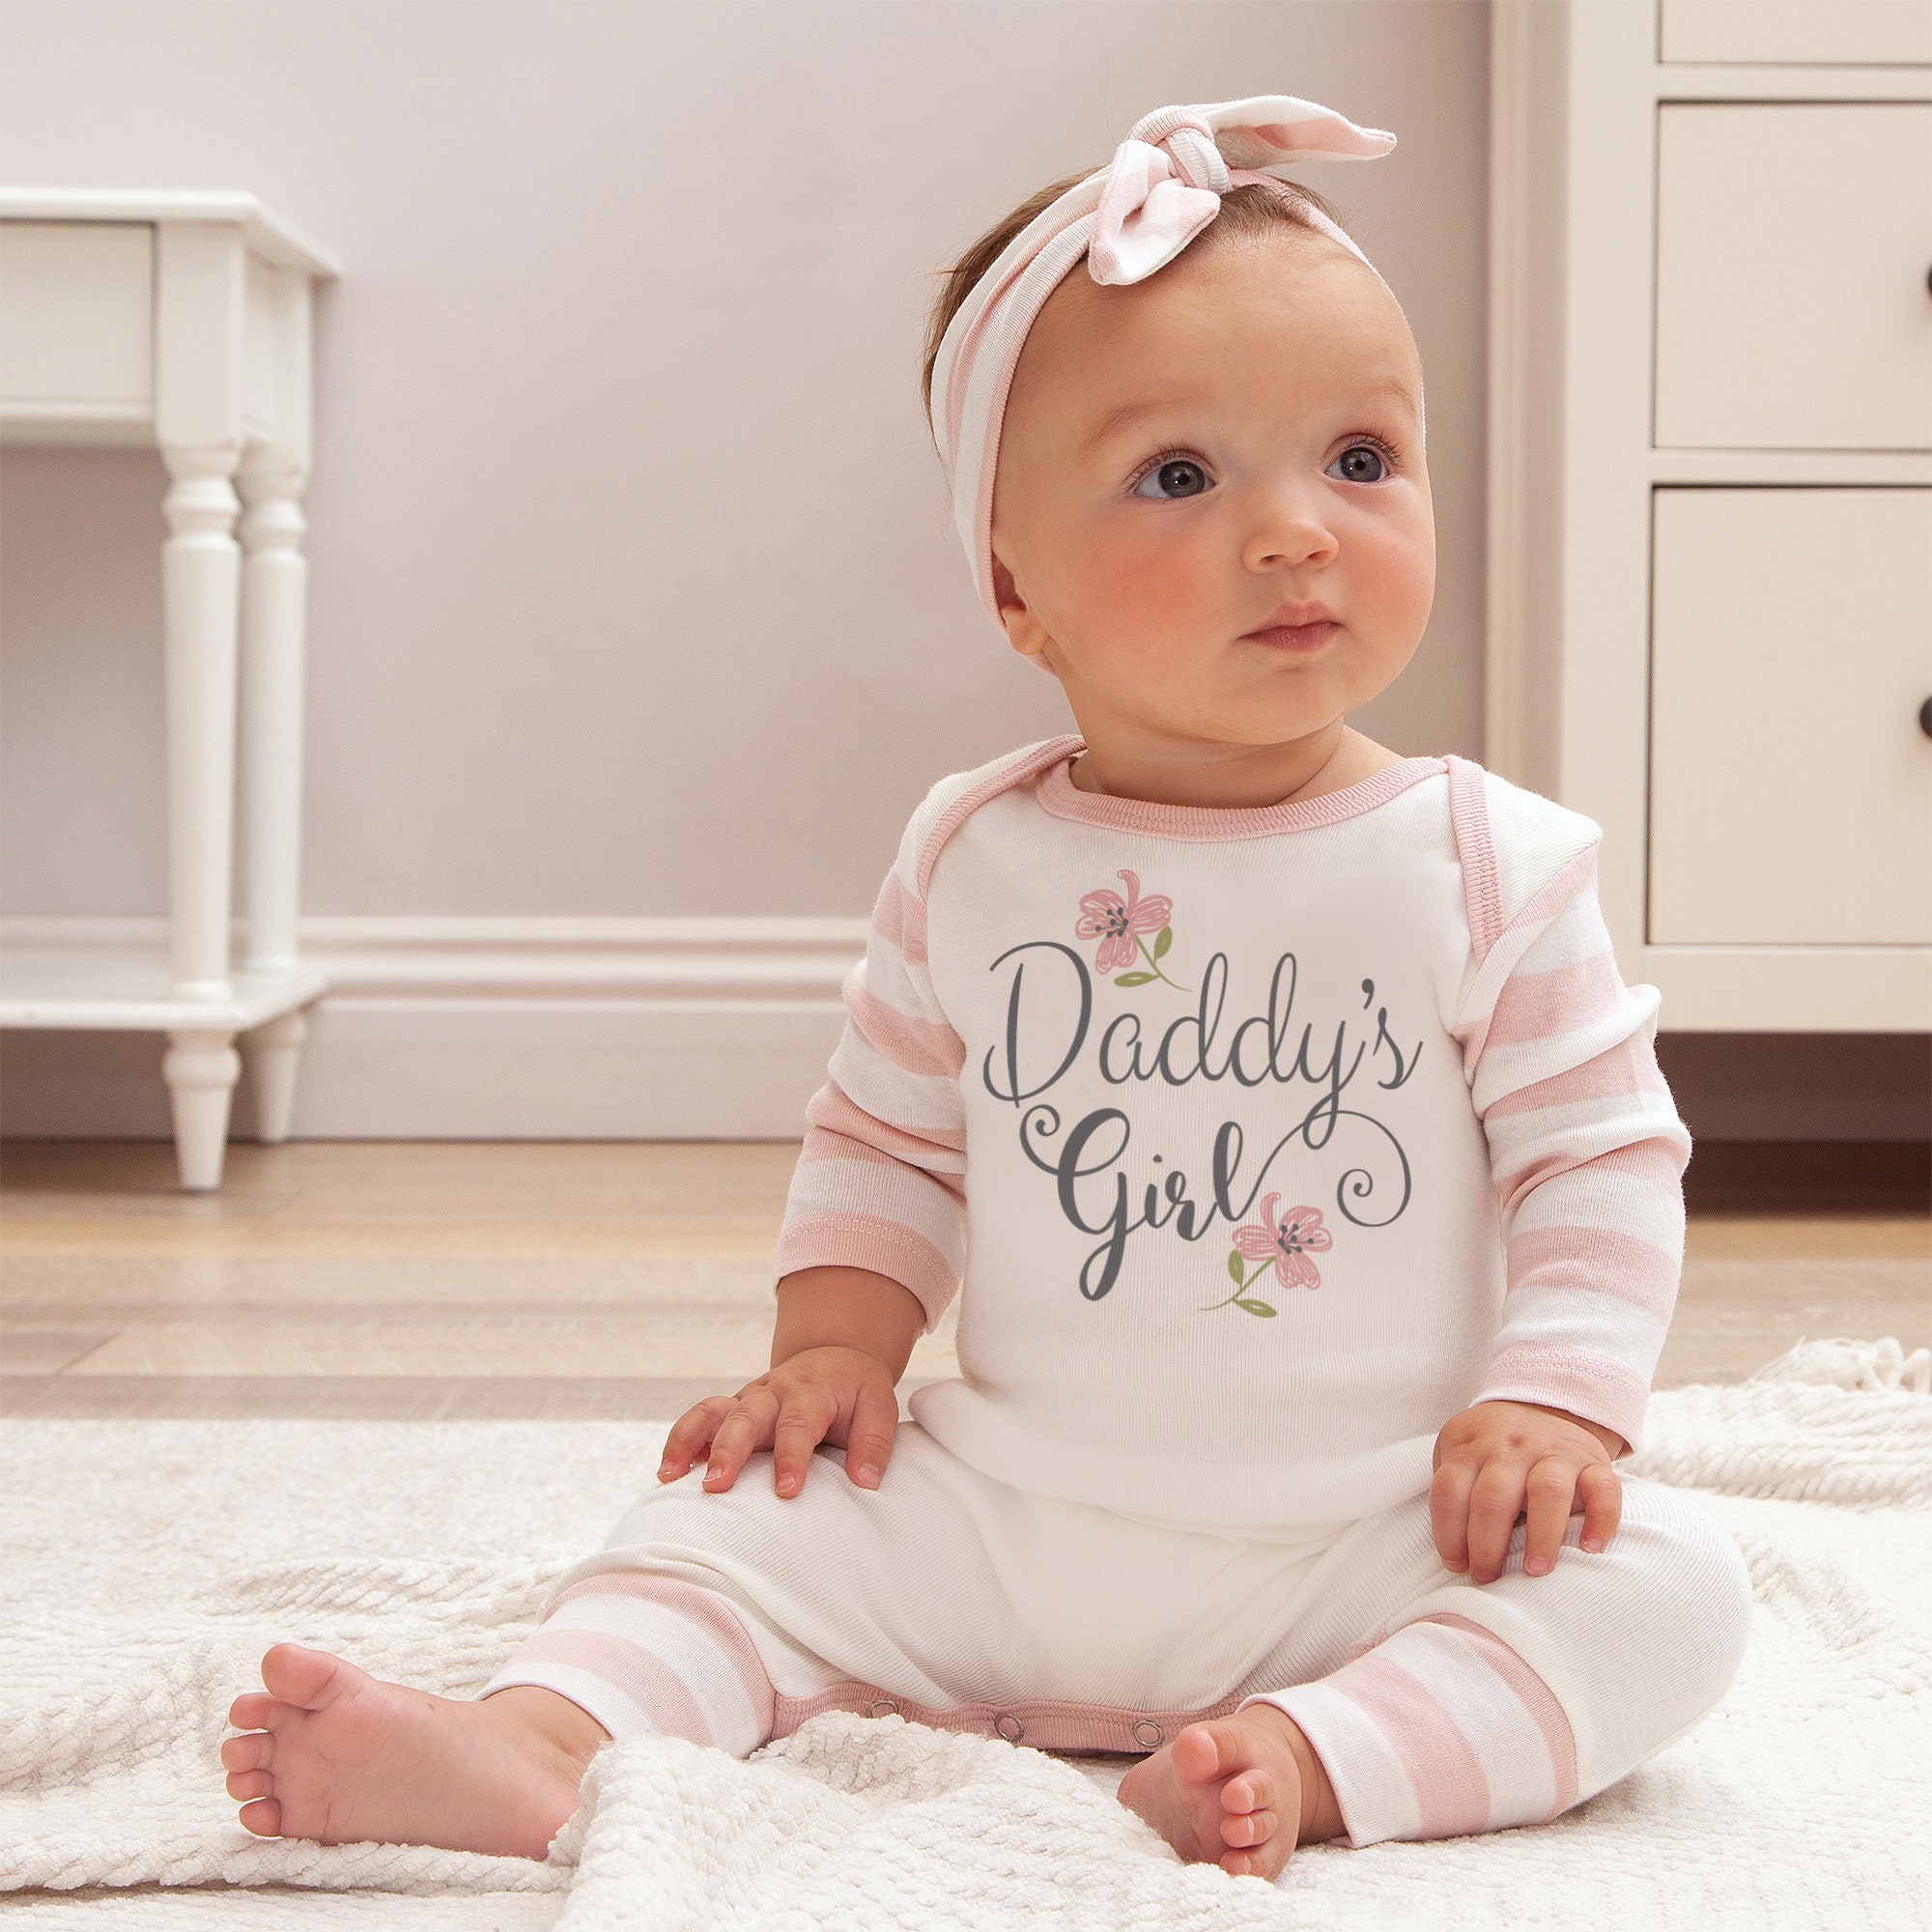 Daddys Girl Outfit - Etsy